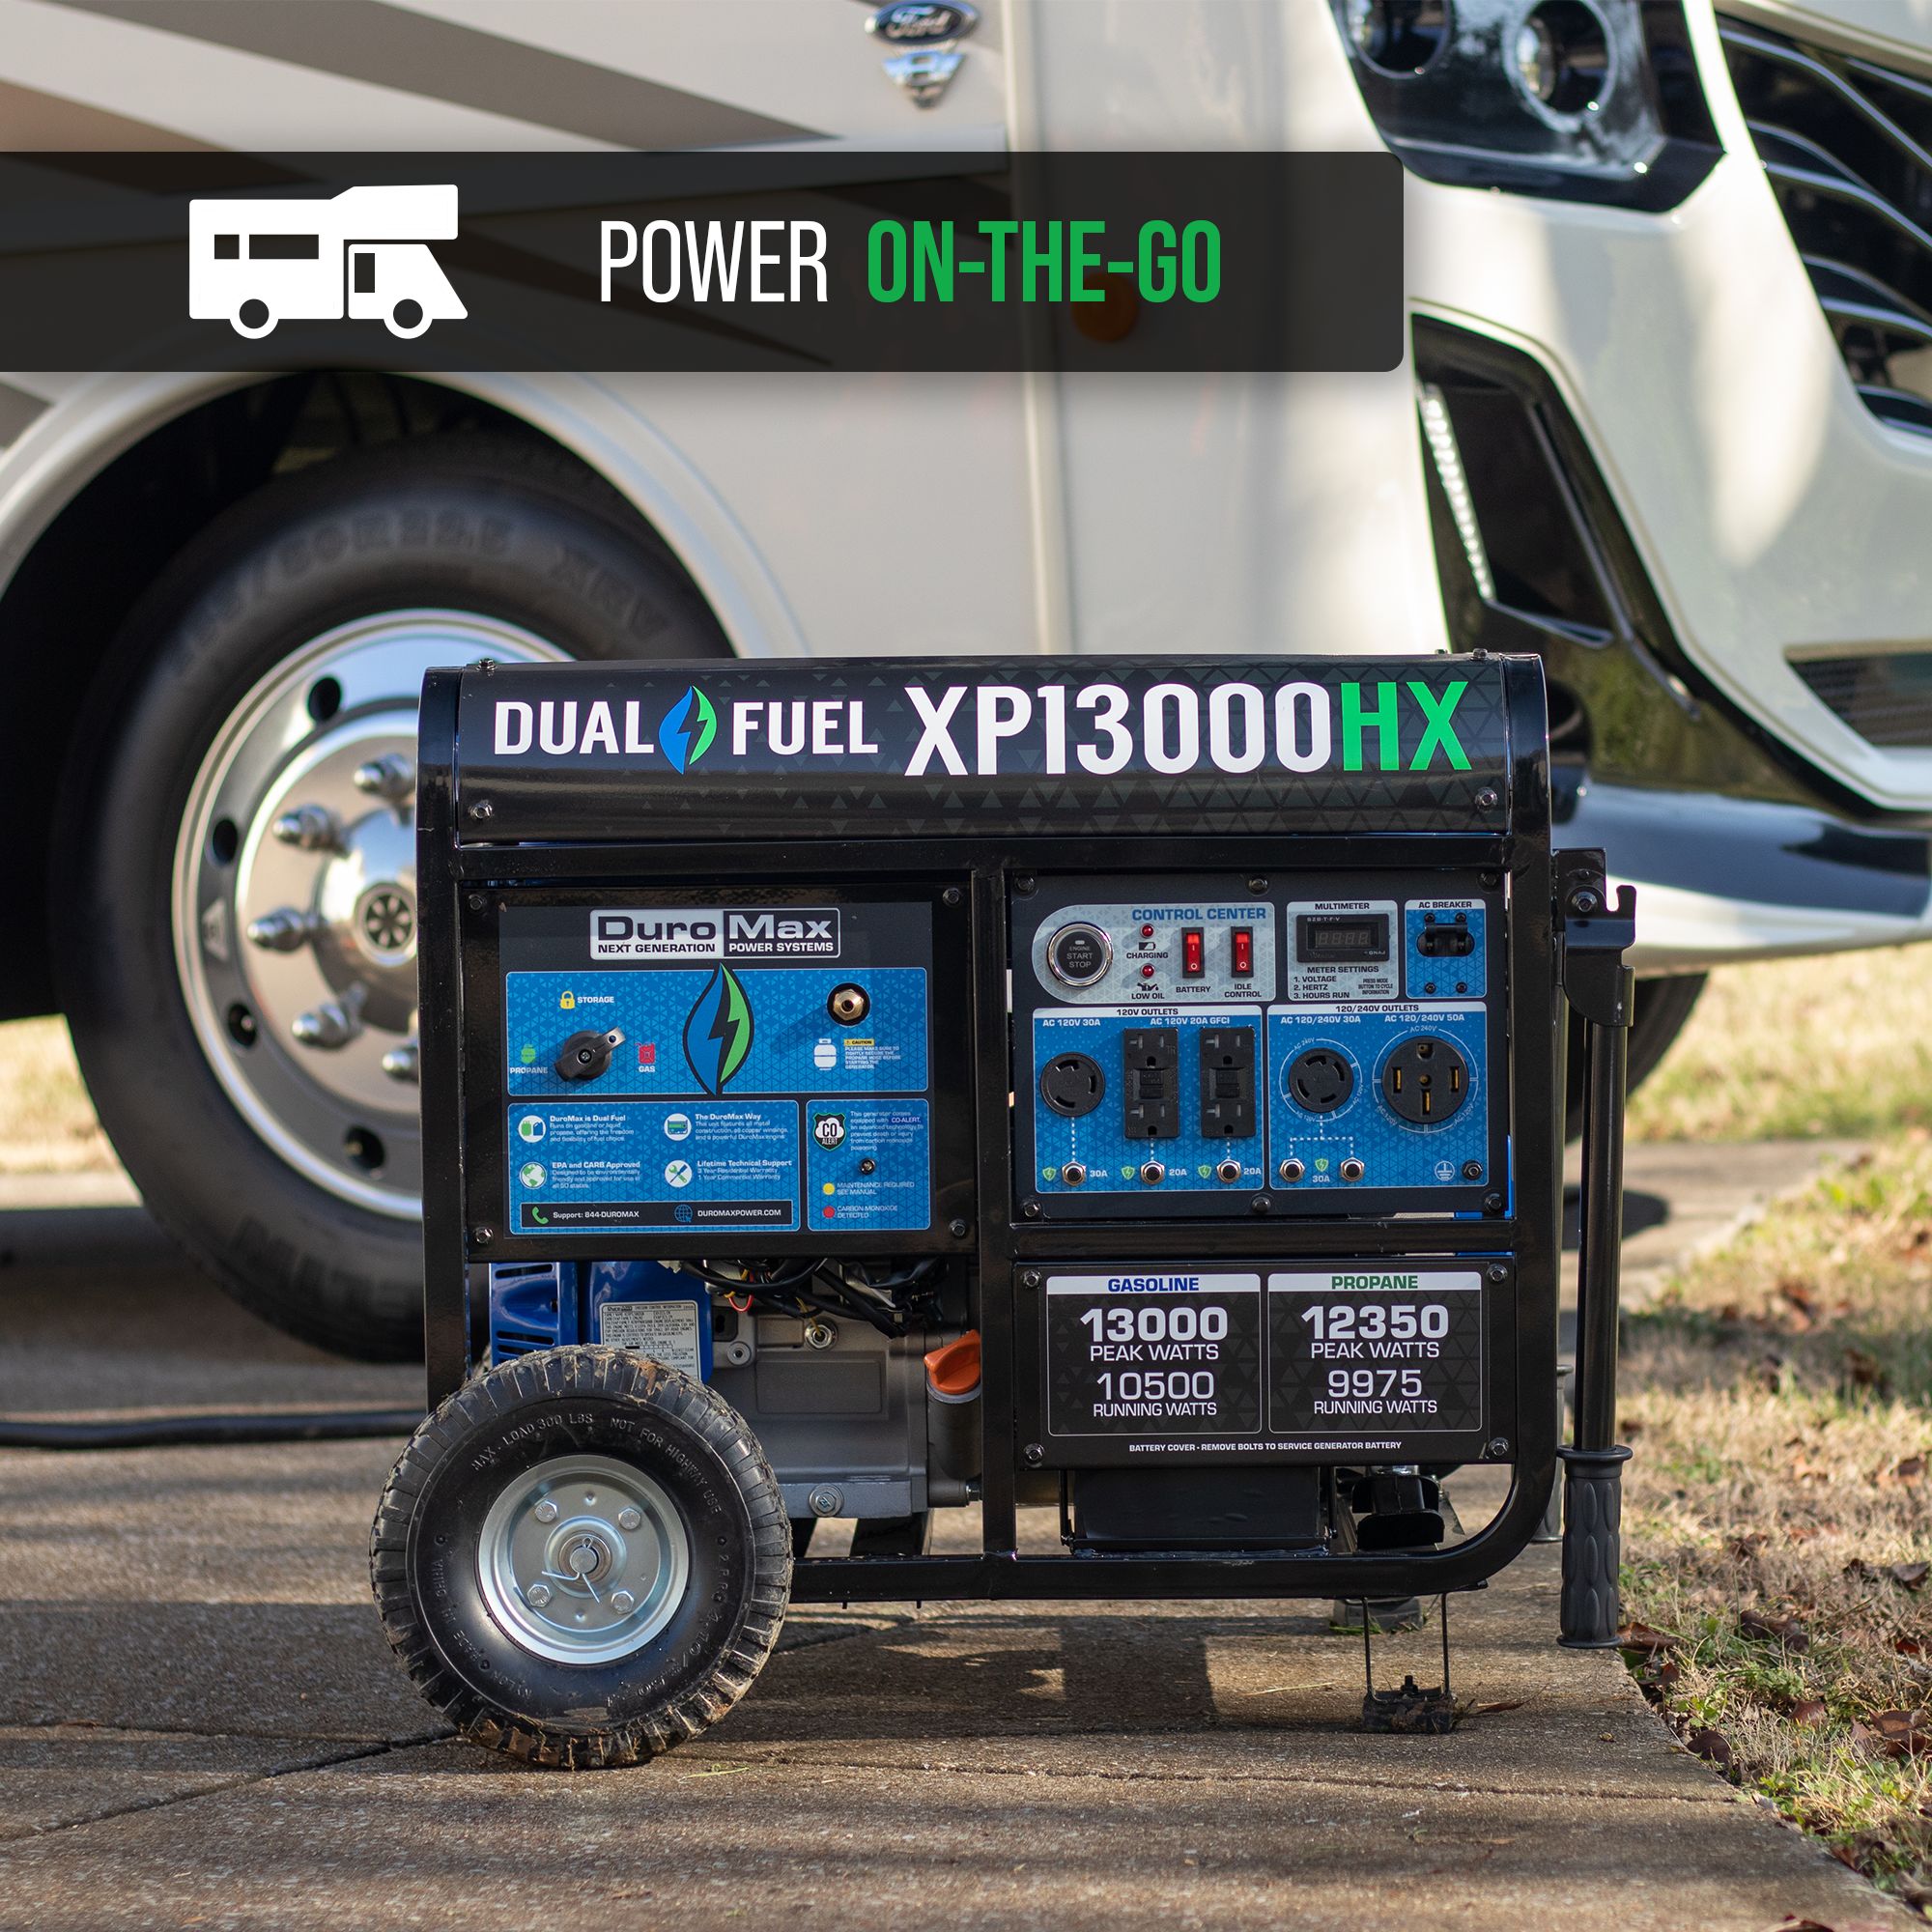 DuroMax HX 500cc Electric department Start in Power Generator Portable Back Home at Portable Up Generators 10500-Watt the